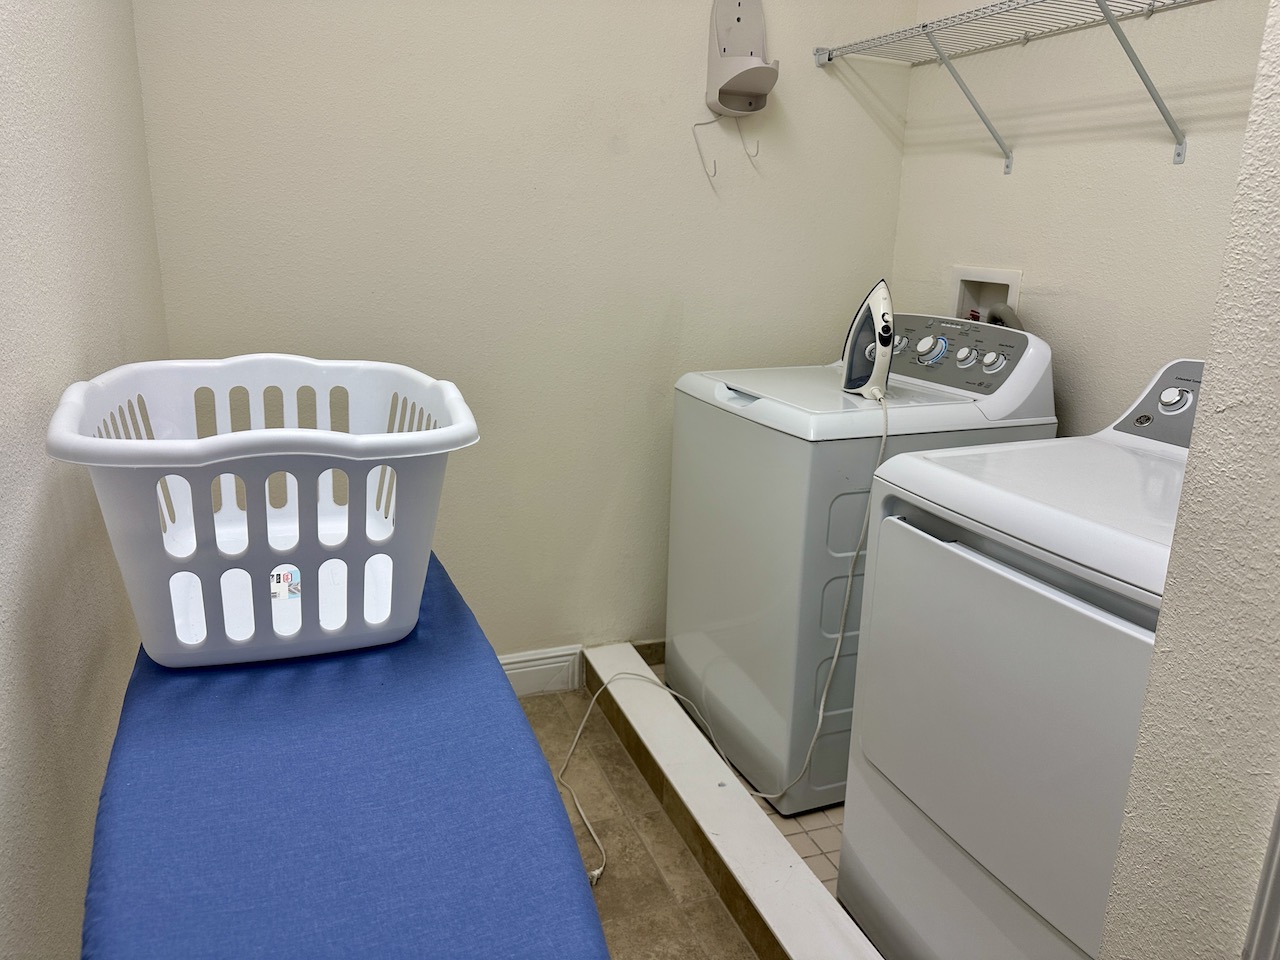 encore resort at reunion 5 bedroom villa laundry room with ironing board, washing basket, top loading washer and dryer